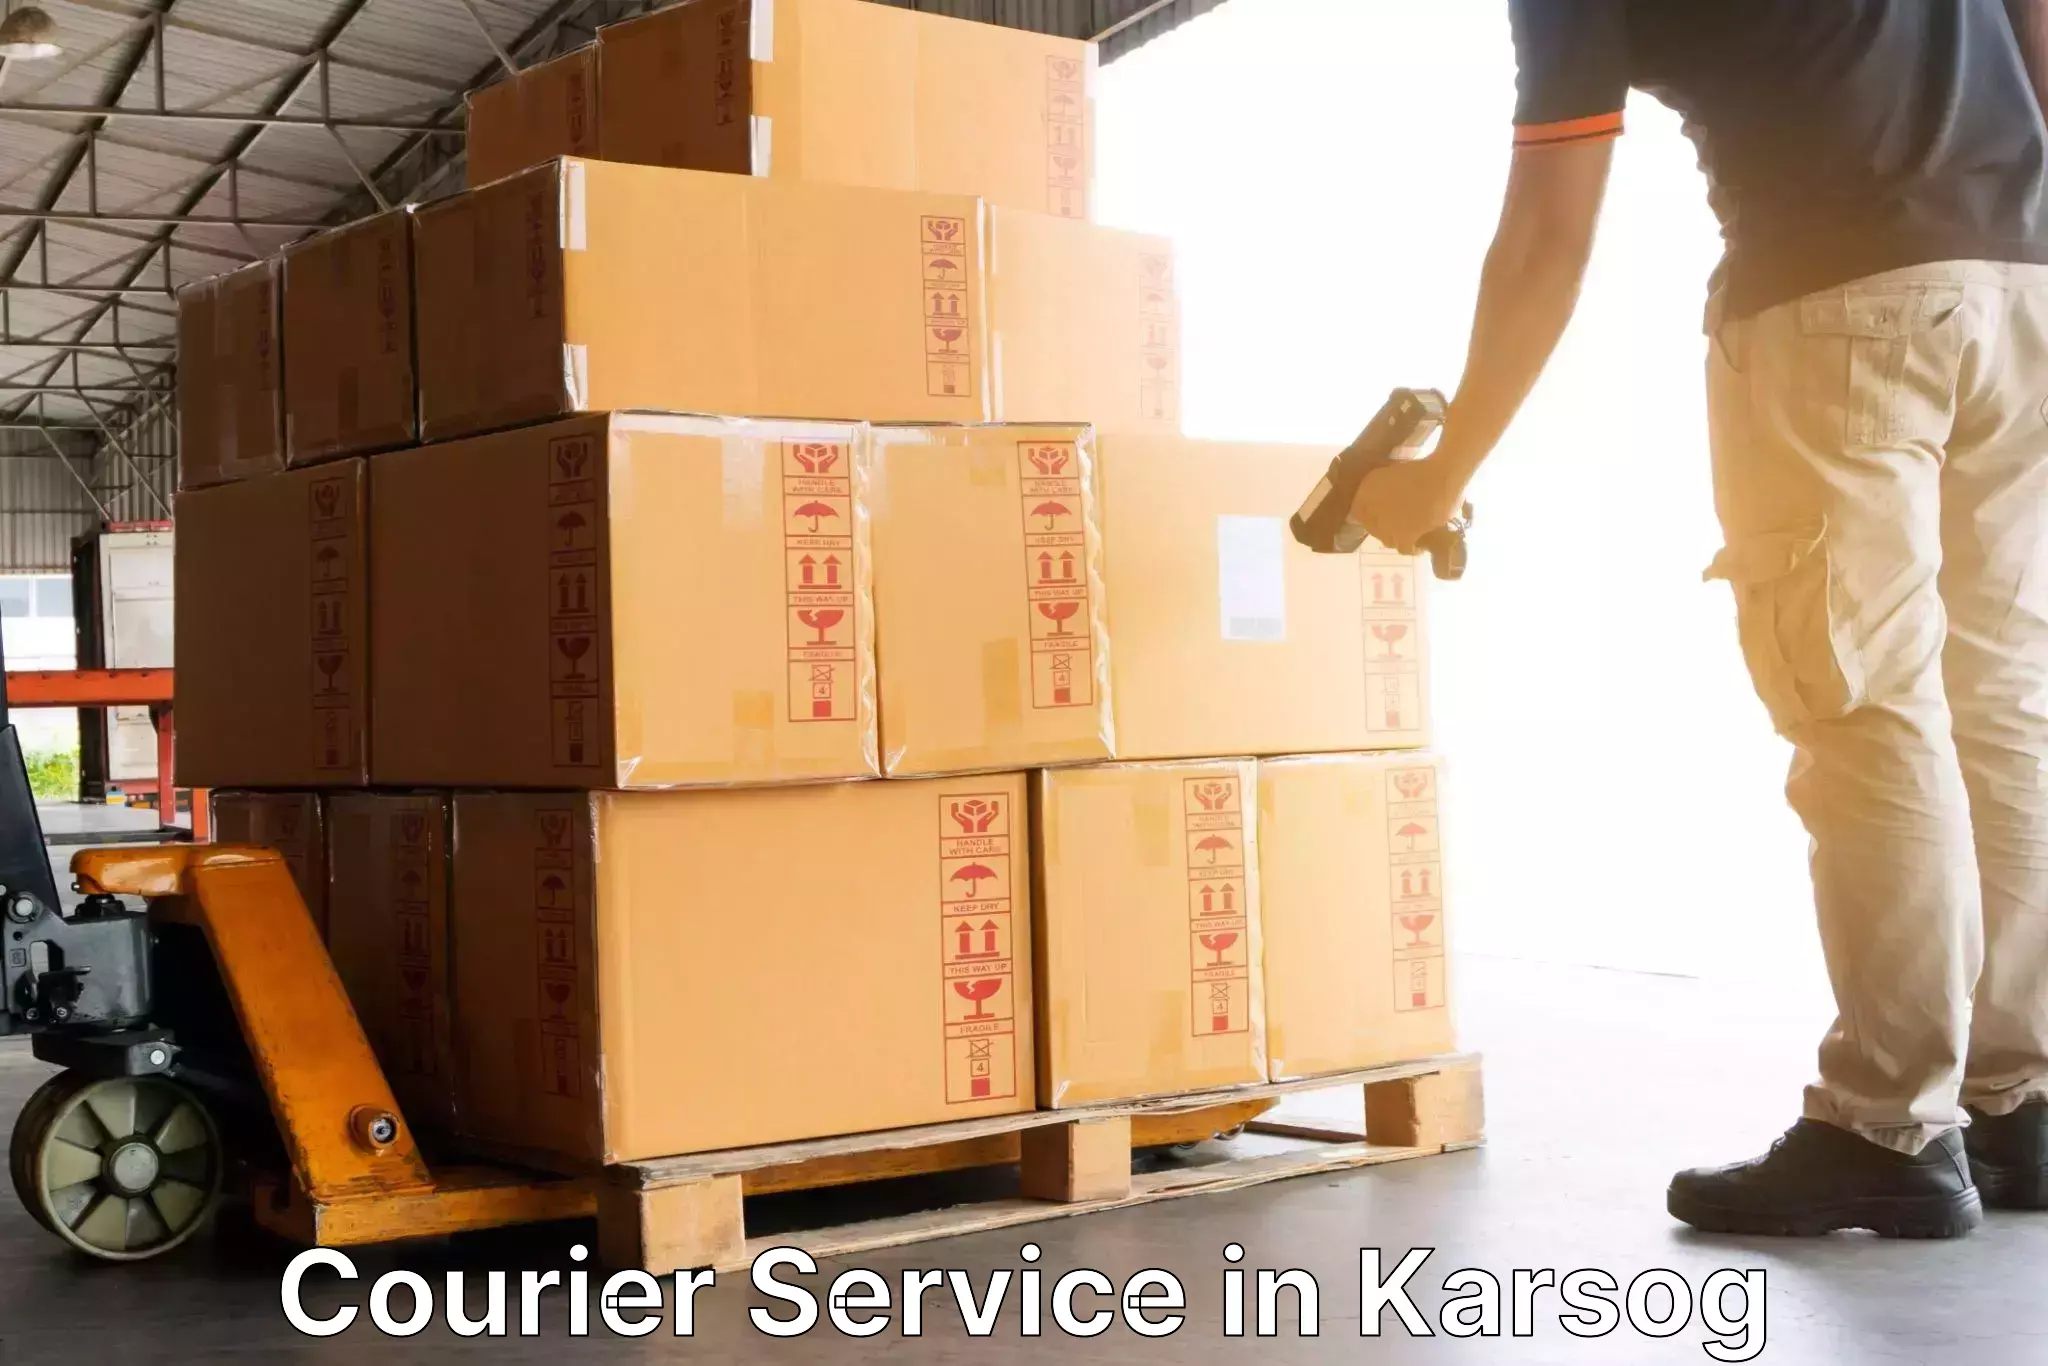 Rapid shipping services in Karsog